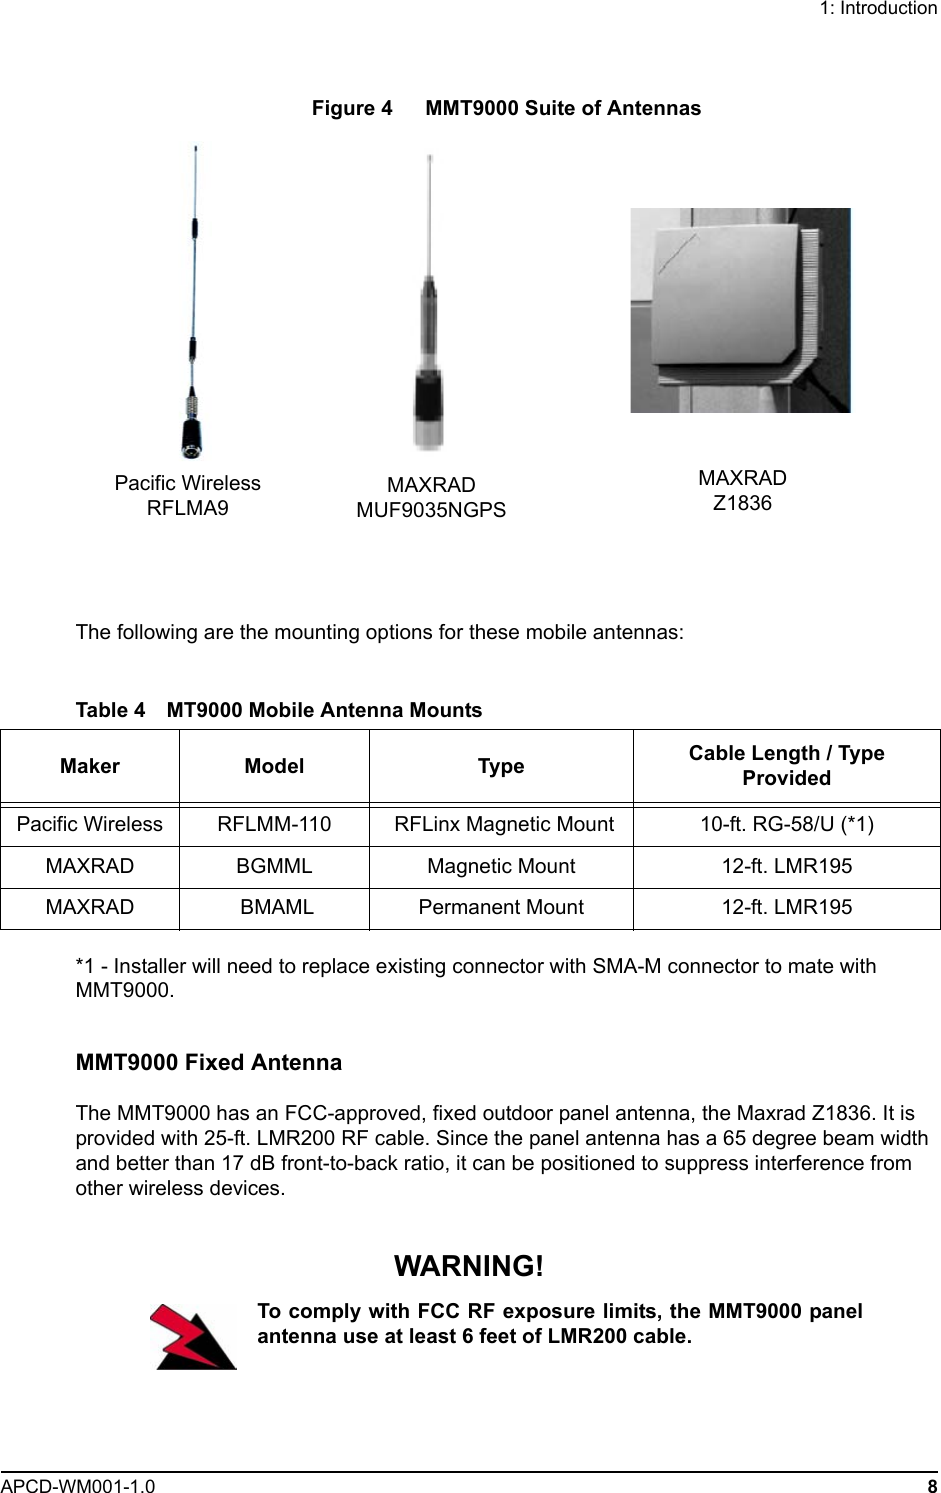 1: IntroductionAPCD-WM001-1.0 8Figure 4   MMT9000 Suite of AntennasThe following are the mounting options for these mobile antennas:Table 4 MT9000 Mobile Antenna Mounts*1 - Installer will need to replace existing connector with SMA-M connector to mate with MMT9000.MMT9000 Fixed AntennaThe MMT9000 has an FCC-approved, fixed outdoor panel antenna, the Maxrad Z1836. It is provided with 25-ft. LMR200 RF cable. Since the panel antenna has a 65 degree beam width and better than 17 dB front-to-back ratio, it can be positioned to suppress interference from other wireless devices.WARNING!To comply with FCC RF exposure limits, the MMT9000 panelantenna use at least 6 feet of LMR200 cable.Pacific Wireless RFLMA9MAXRAD MUF9035NGPSMAXRAD Z1836Maker Model Type Cable Length / Type ProvidedPacific Wireless RFLMM-110  RFLinx Magnetic Mount 10-ft. RG-58/U (*1)MAXRAD BGMML Magnetic Mount 12-ft. LMR195MAXRAD  BMAML Permanent Mount  12-ft. LMR195